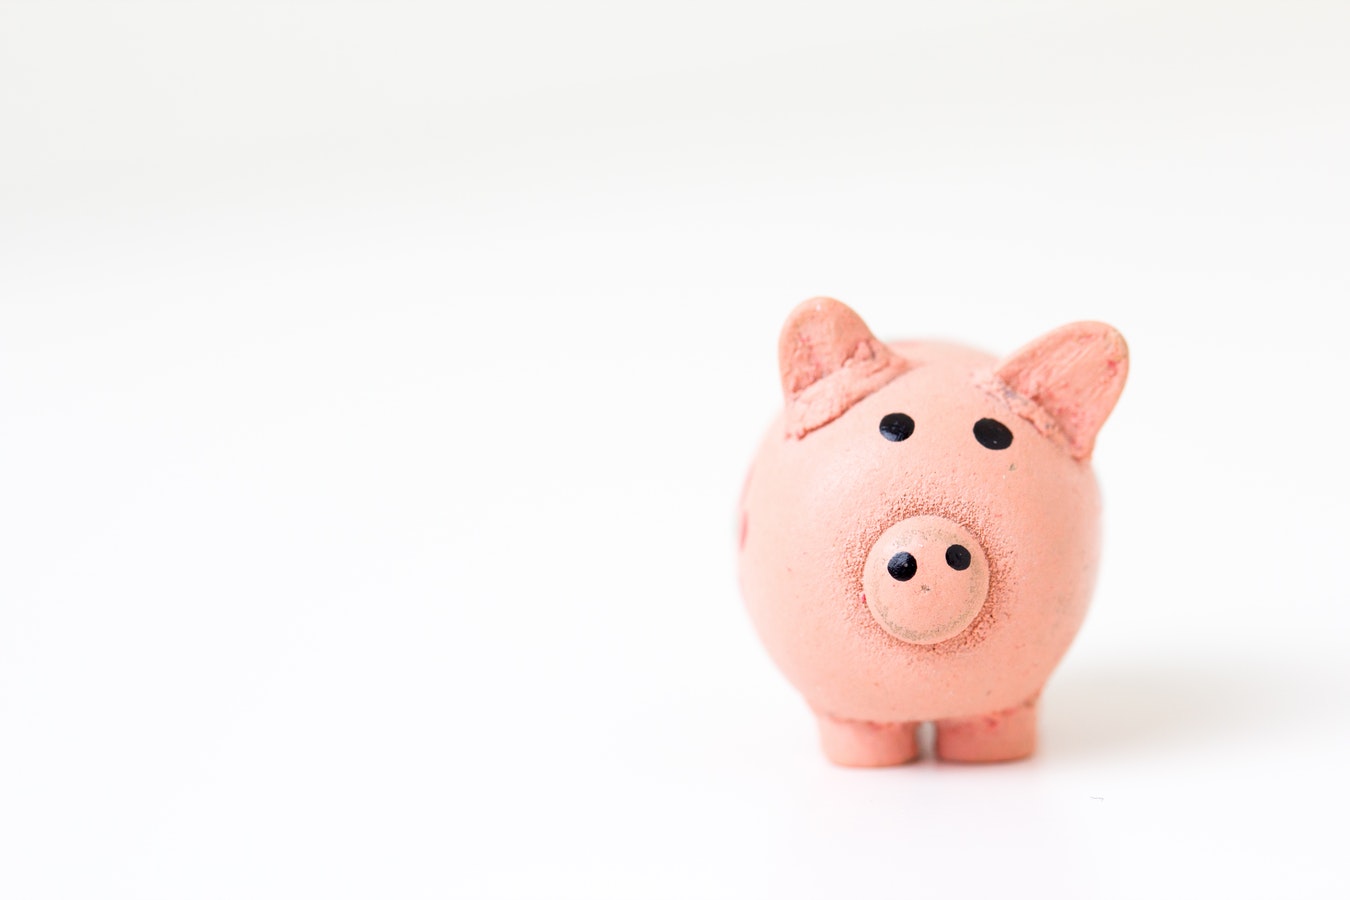 SAVINGS ACCOUNTS AND WHY THEY ARE IMPORTANT